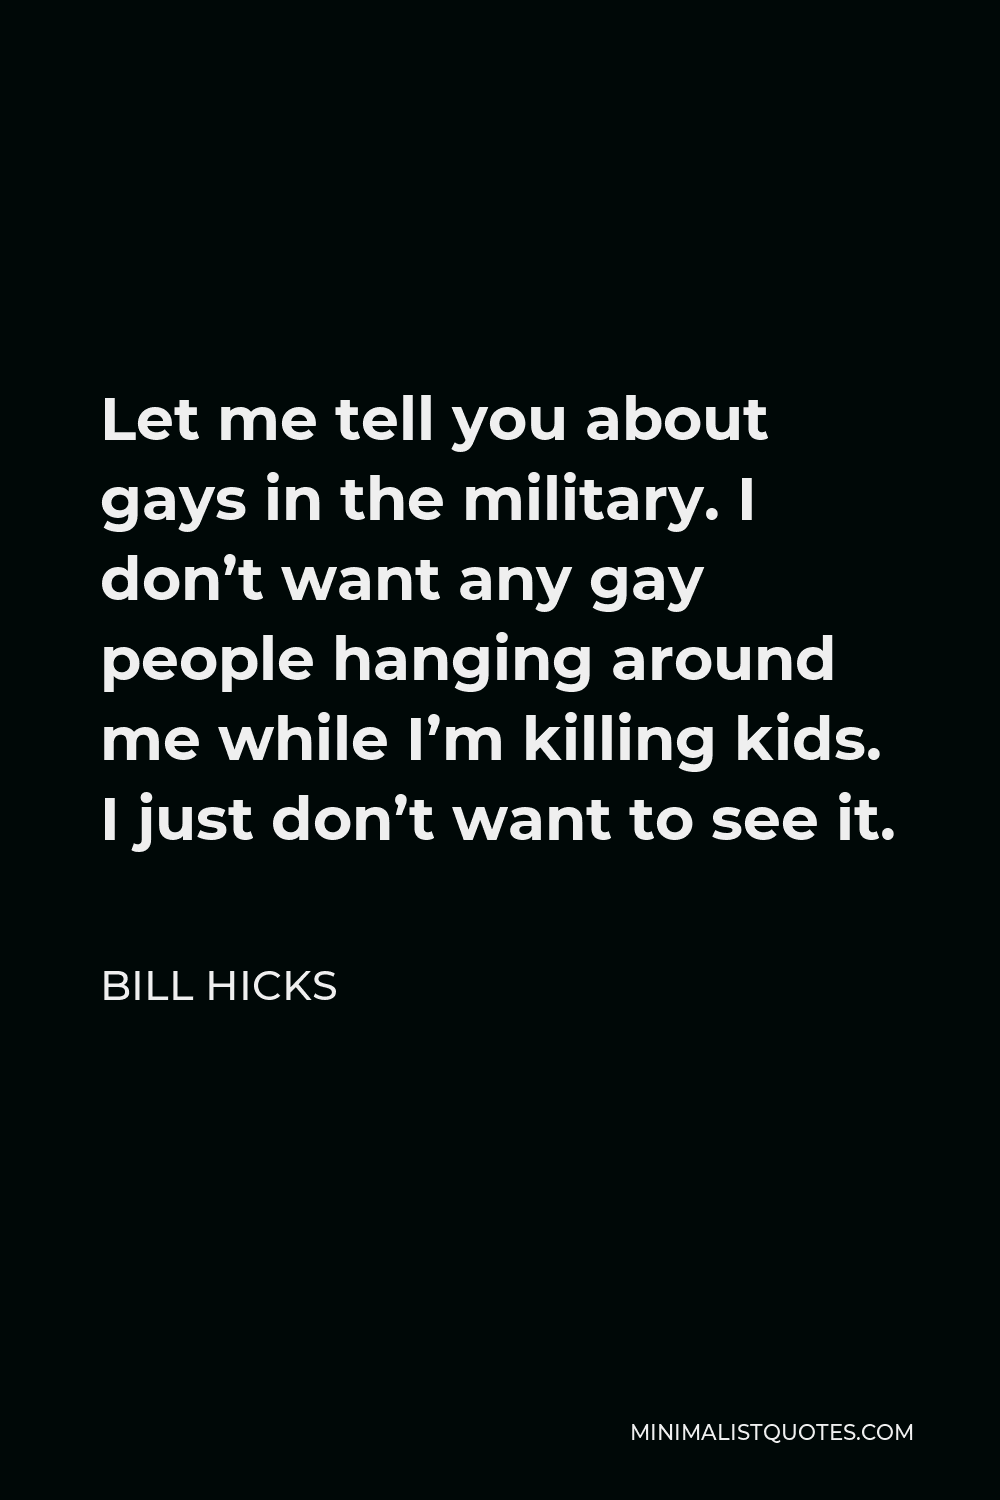 Bill Hicks Quote - Let me tell you about gays in the military. I don’t want any gay people hanging around me while I’m killing kids. I just don’t want to see it.